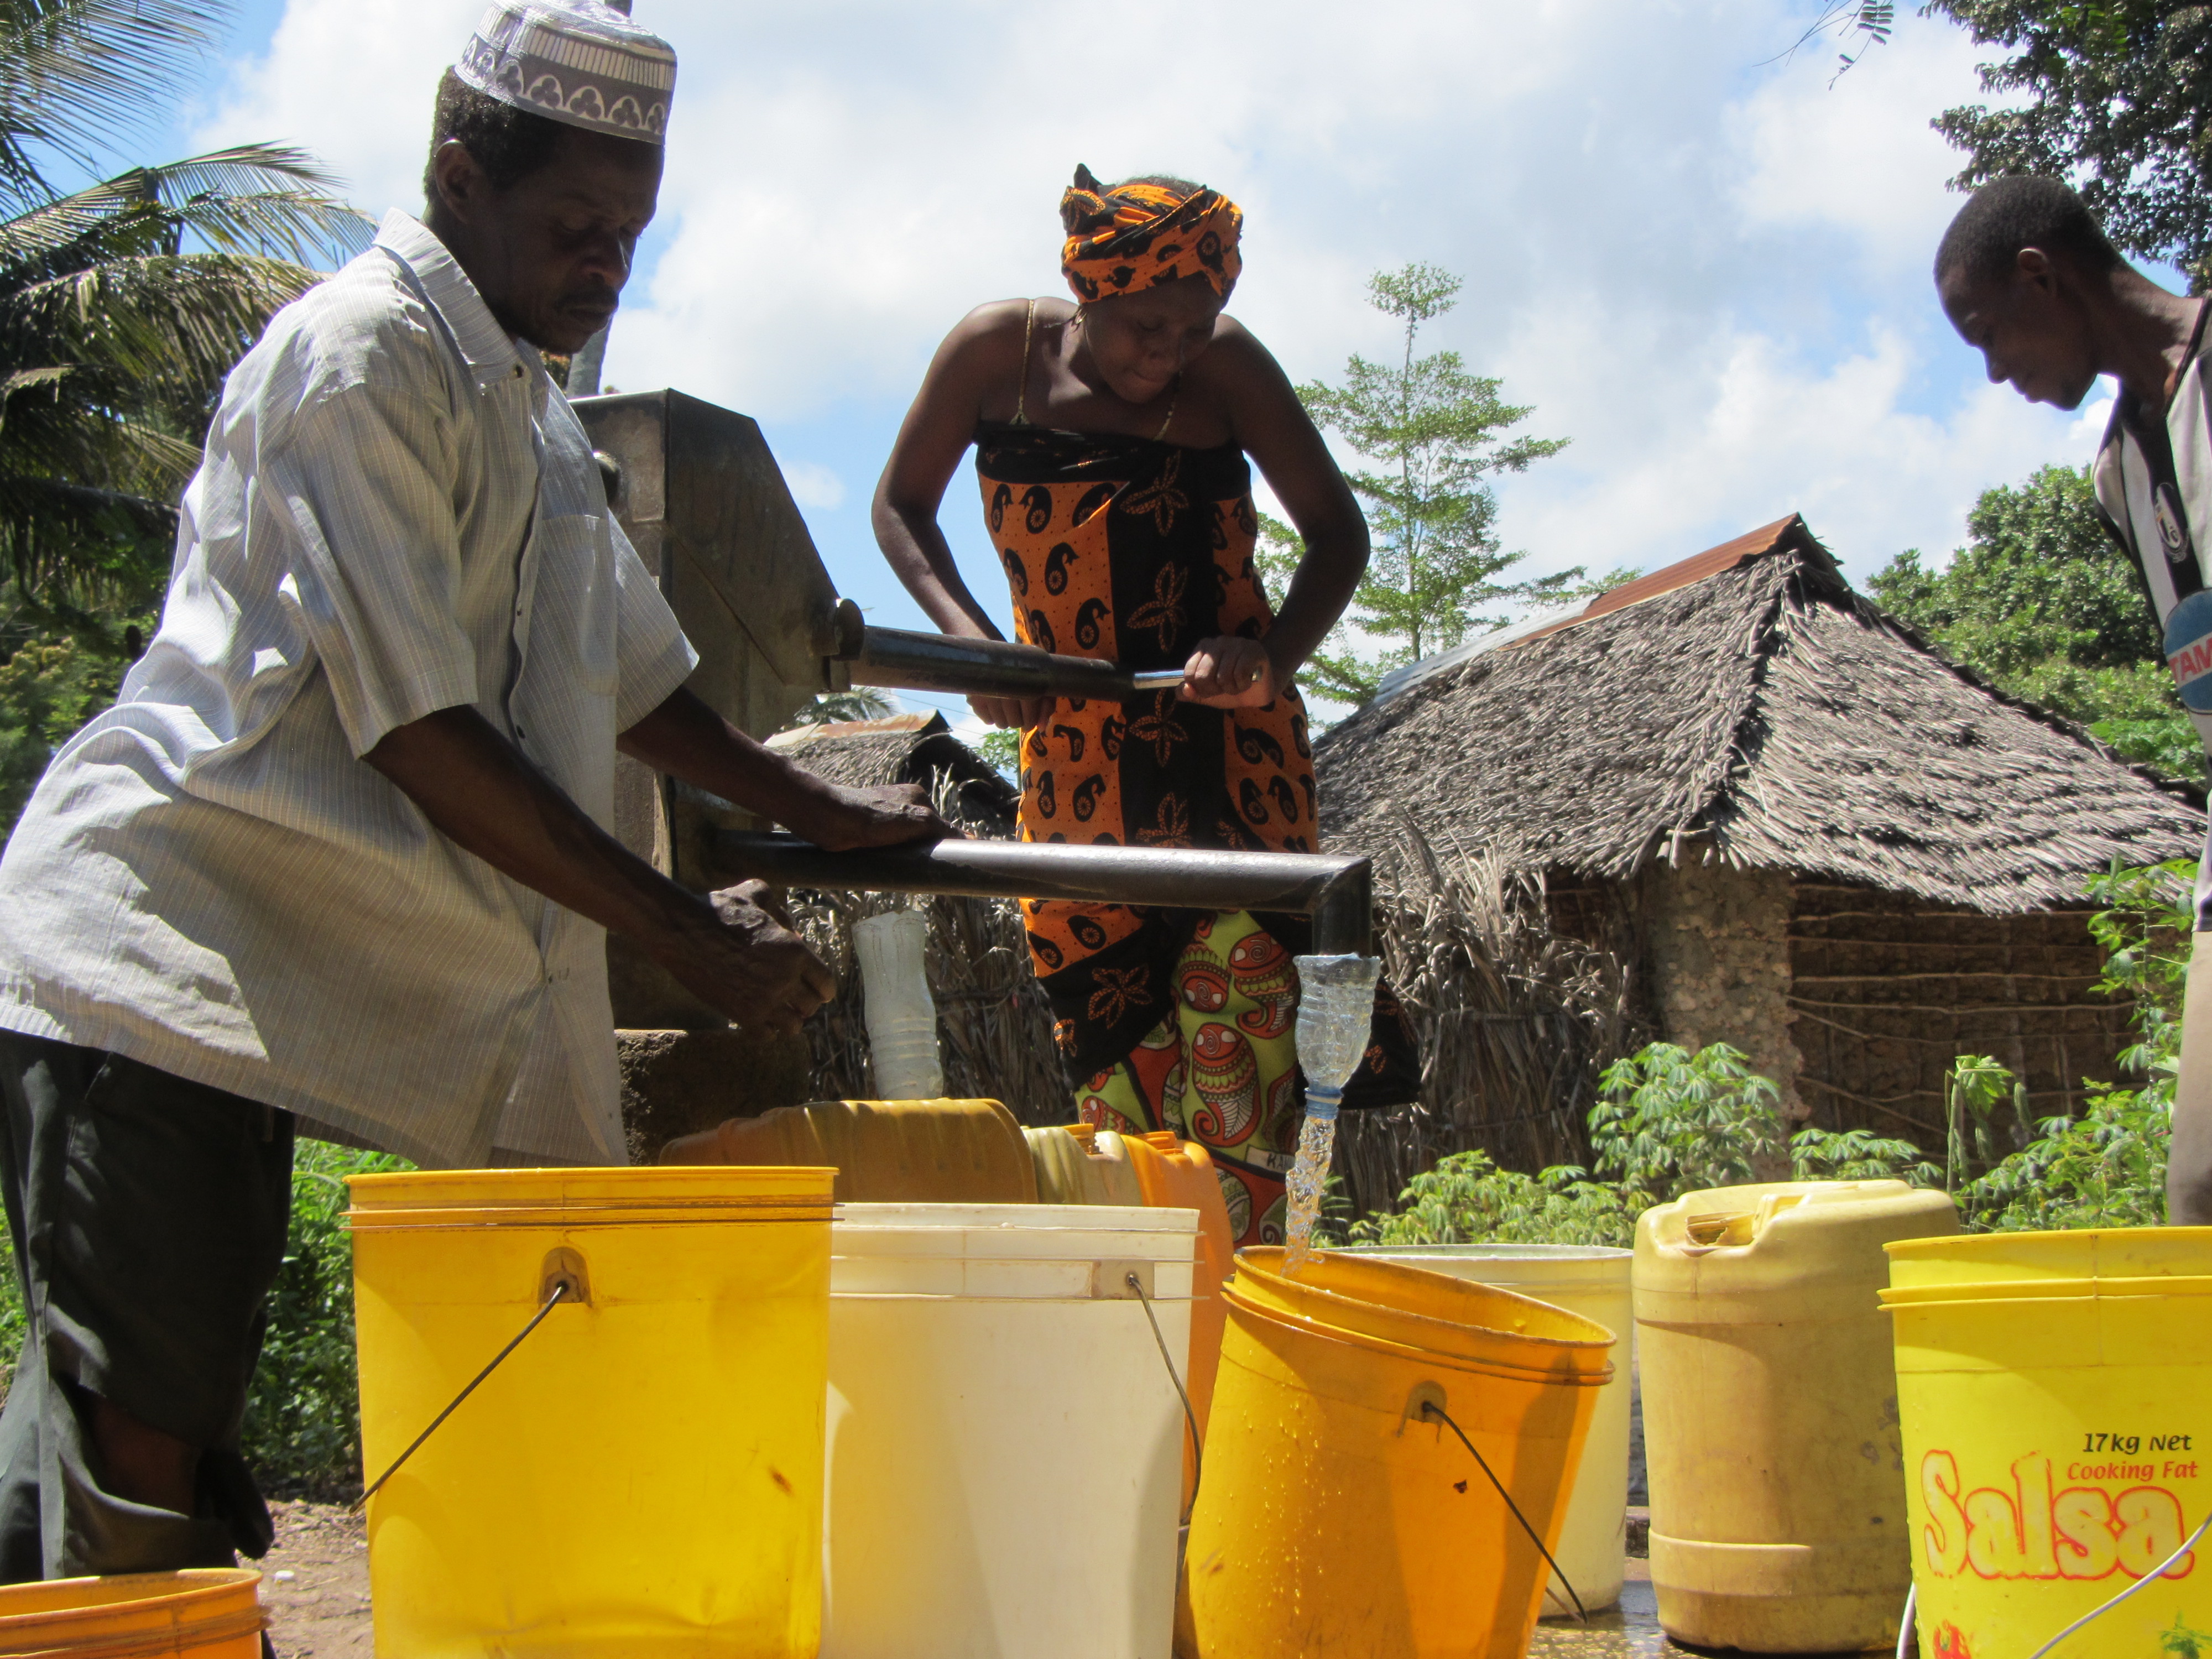 200 million people in Sub-Saharan Africa rely on handpumps to access groundwater © Tim Foster/REACH